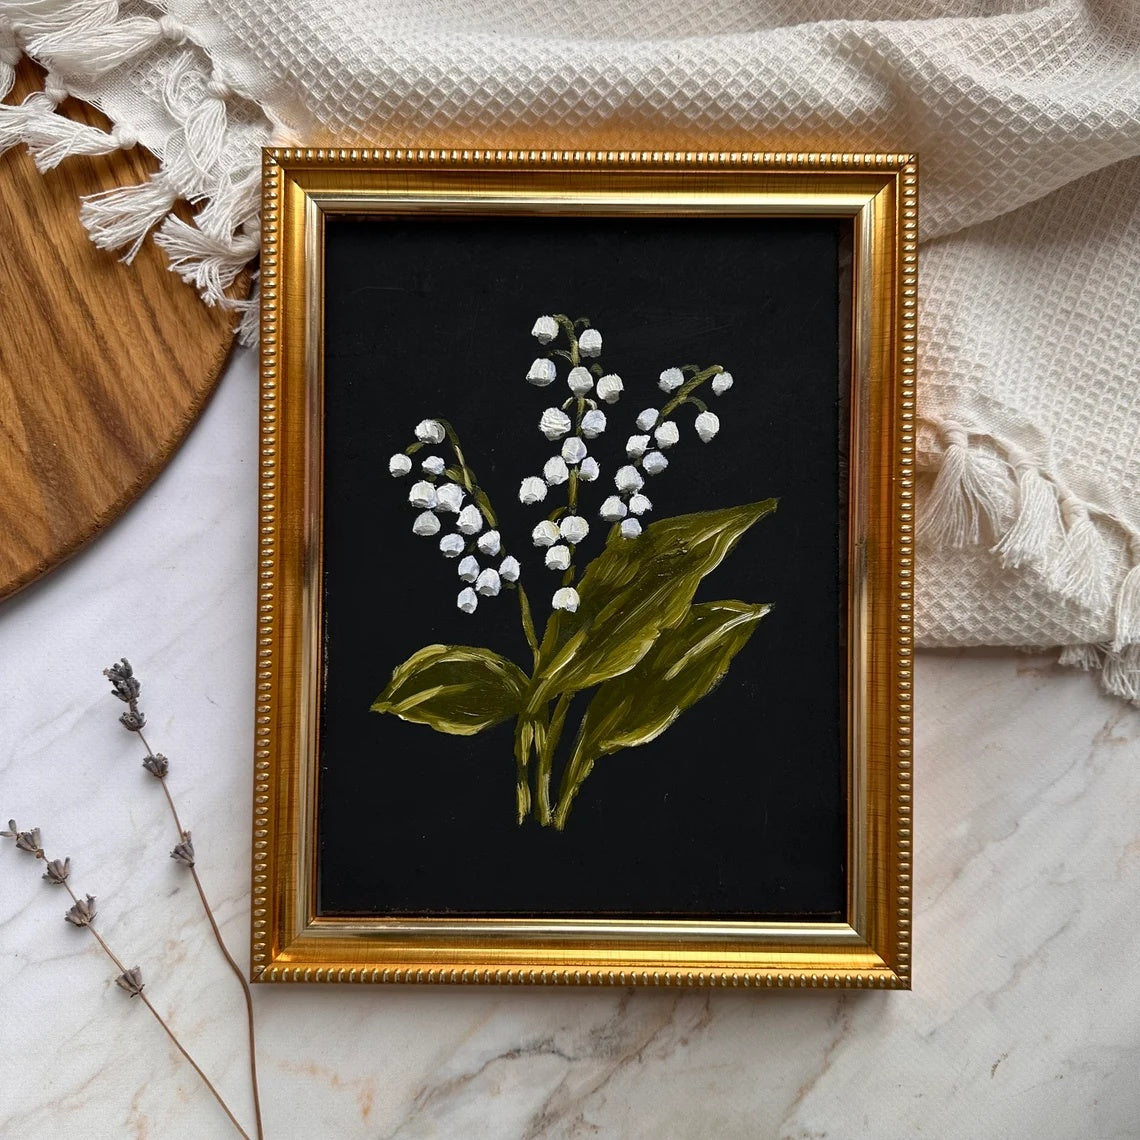 Elegance in Simplicity: A Classic Floral Oil Painting Finds Its Home